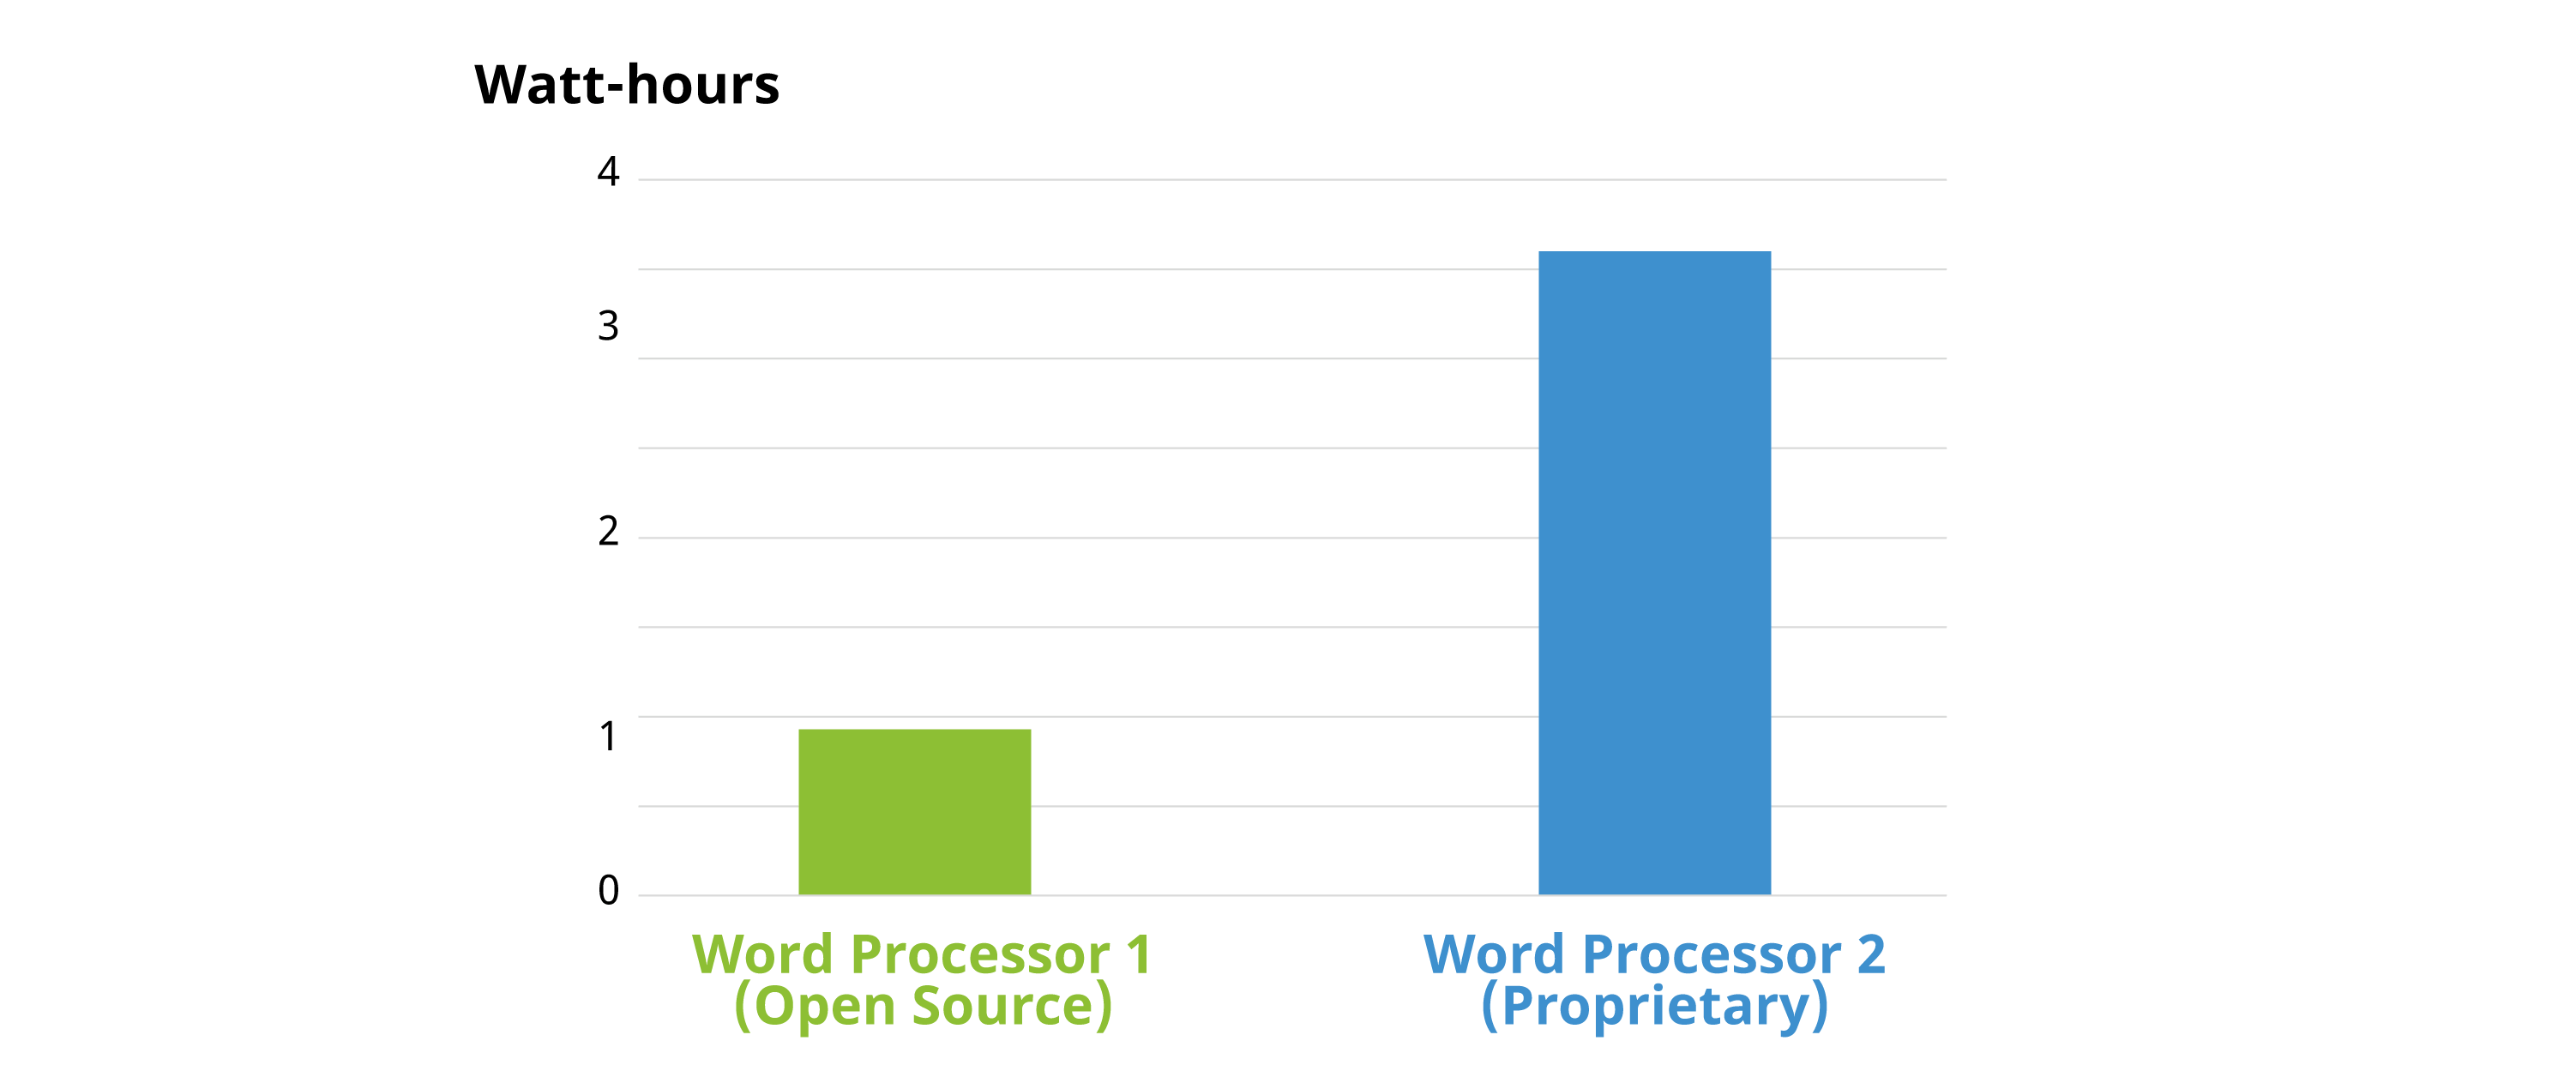 Bar plot comparing two word processors during execution of a Standard Usage Scenario (based on Figure 1 on page 24 in the German Environment Agency report). Word Processor 1 is an Open Source program. This word processor consumes four times <em>less</em> energy than Word Processor 2, a proprietary program. (Image from KDE published under a <a href="https://spdx.org/licenses/CC-BY-SA-4.0.html">CC-BY-SA-4.0</a> license.)